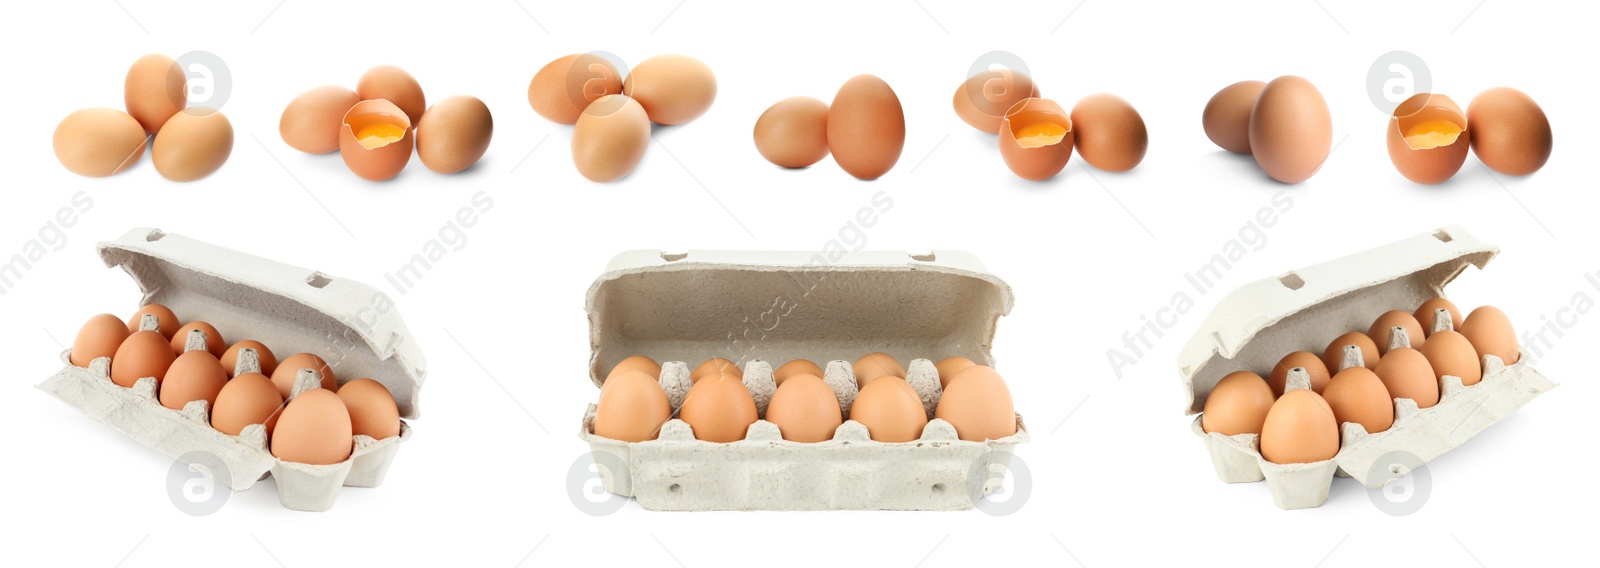 Image of Set of whole and broken eggs on white background, banner design